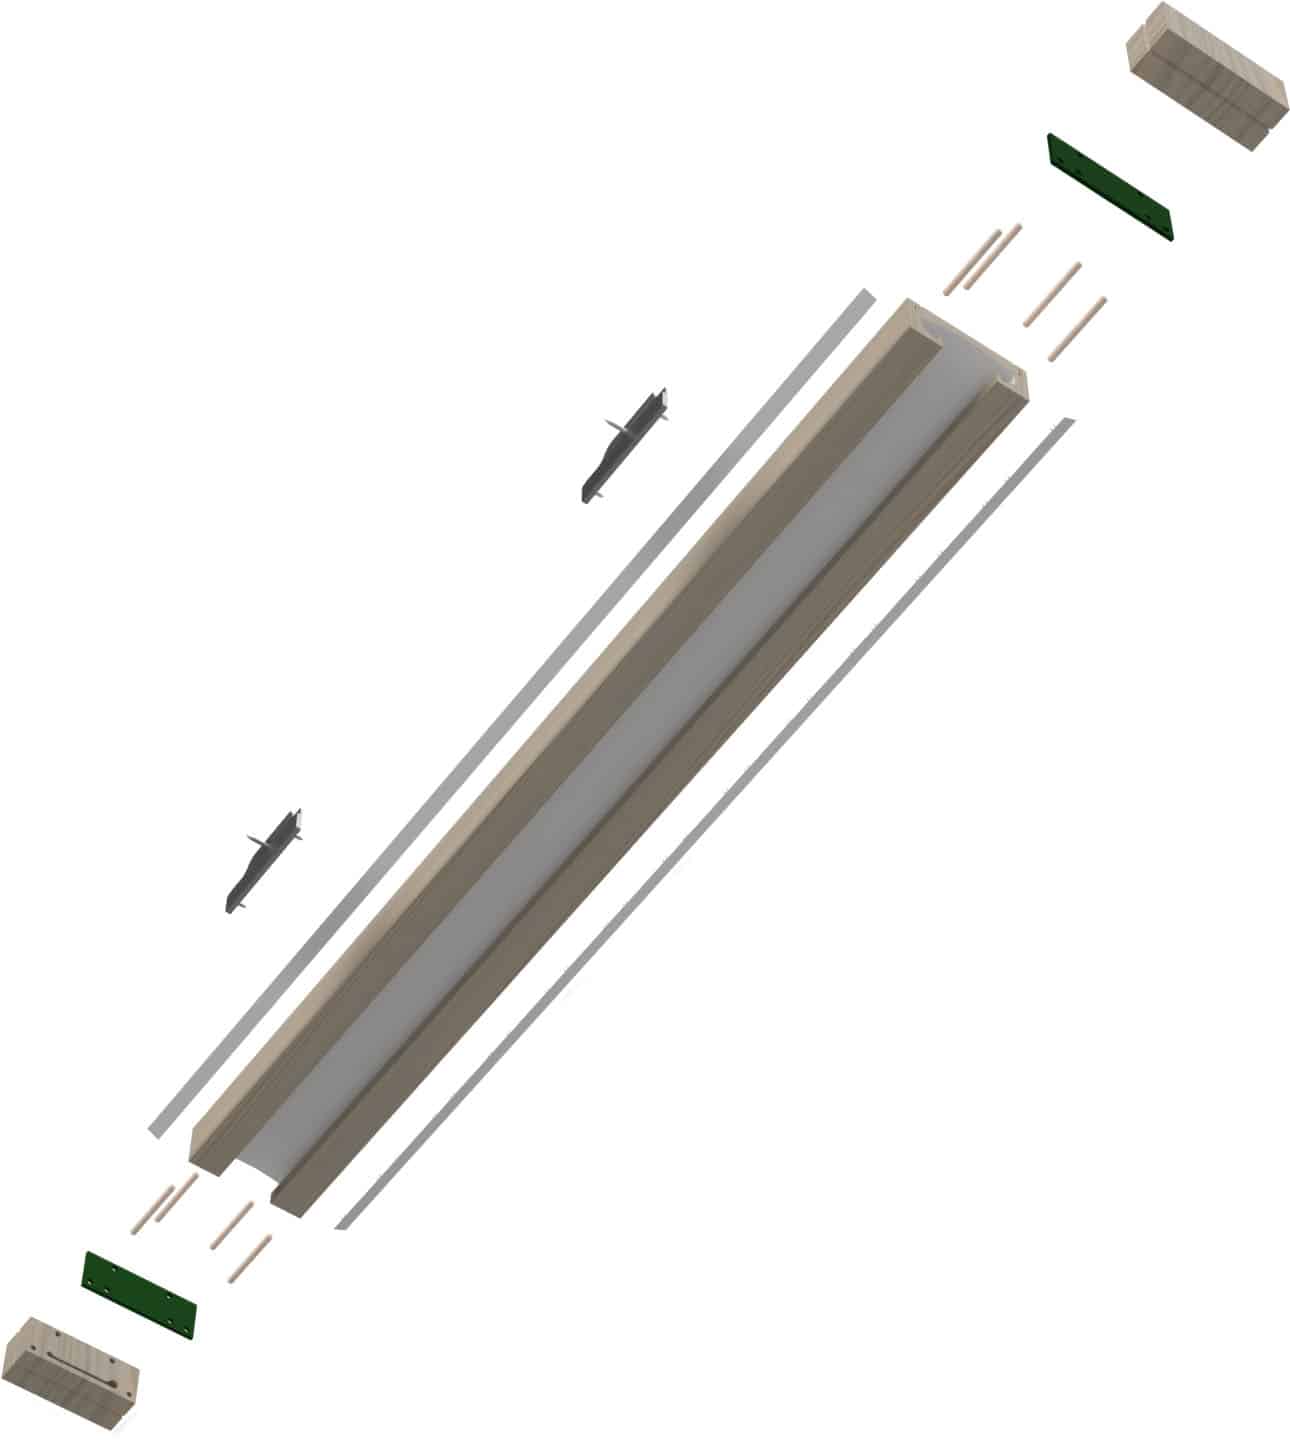 lightly glow direct cantilever light fixture exploded view diagram